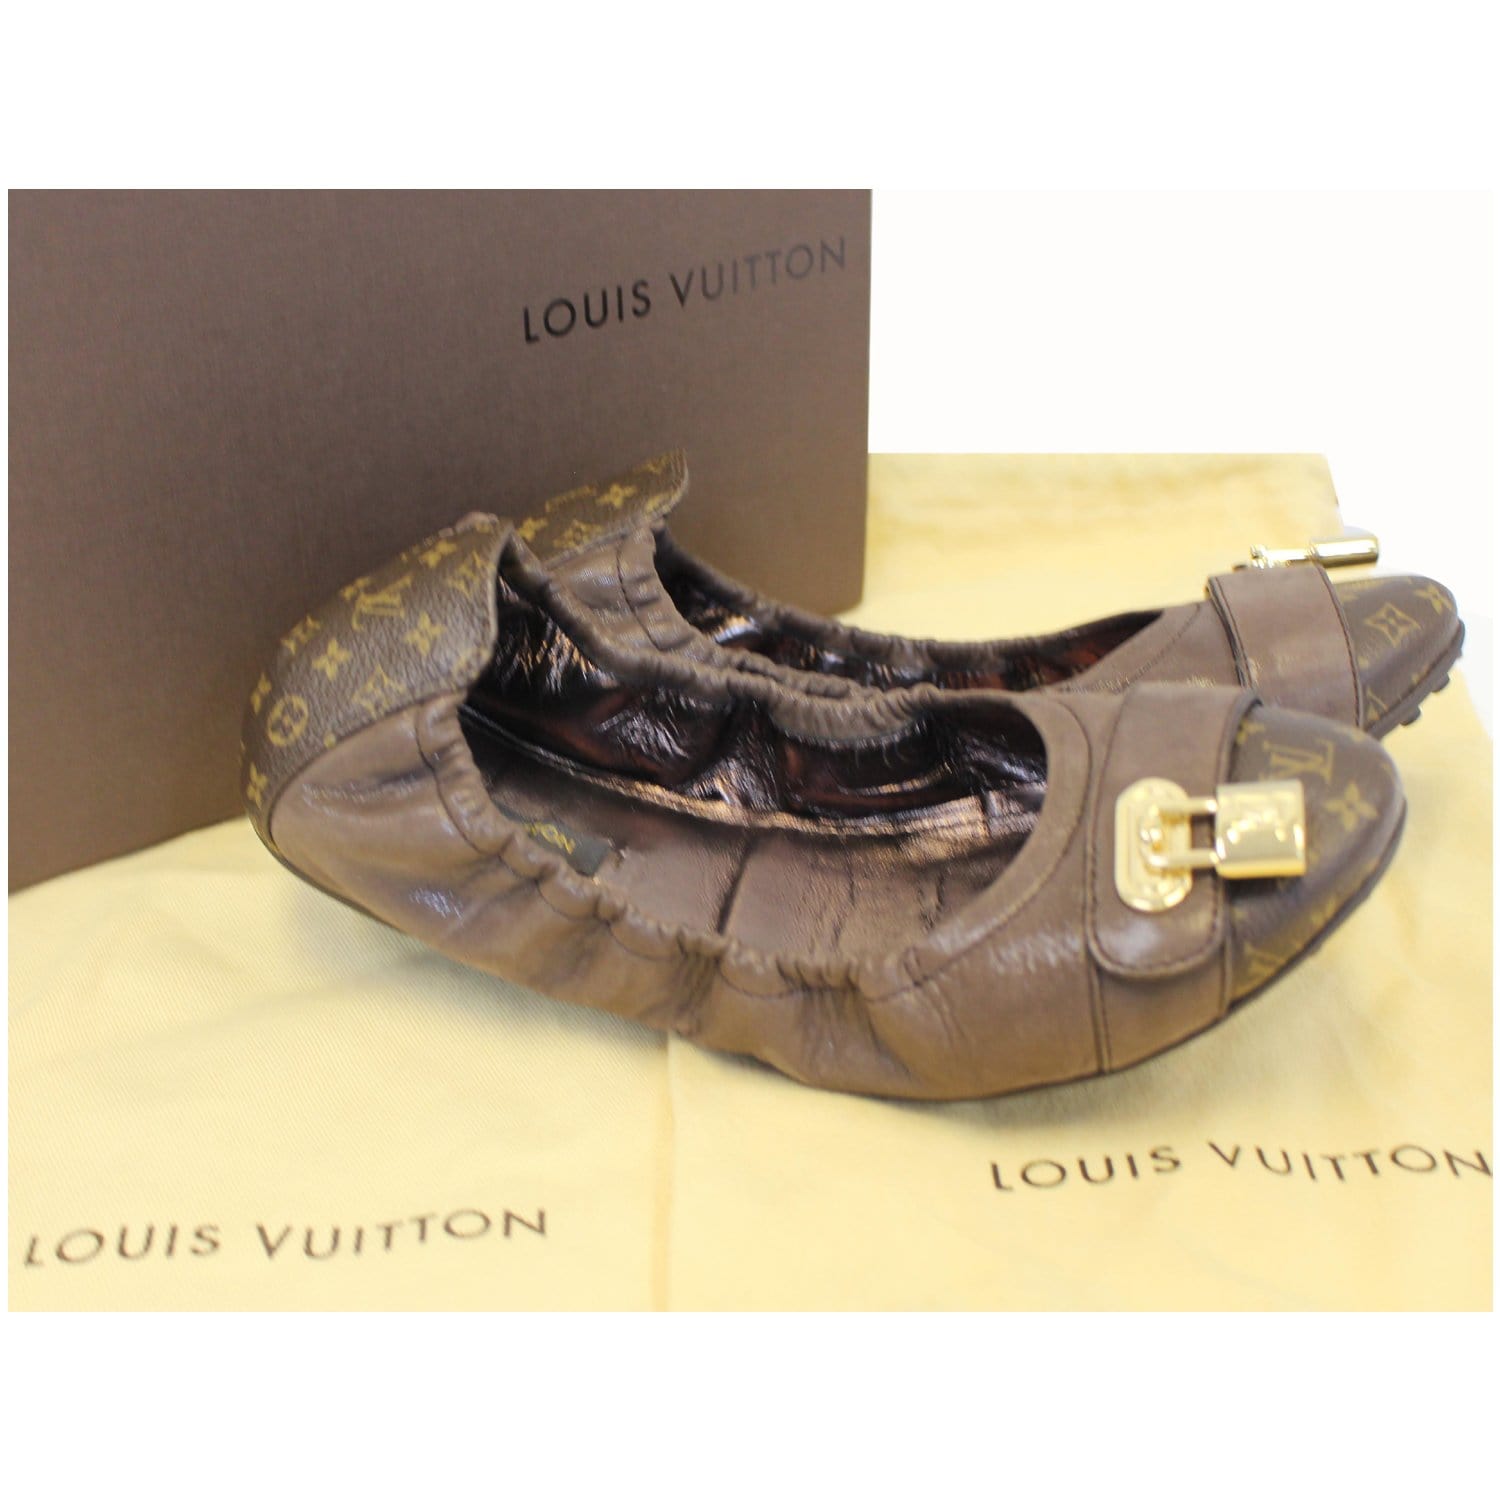 Louis Vuitton -Black Italy Suede Wedges- Size 38, VERY CLEAN***